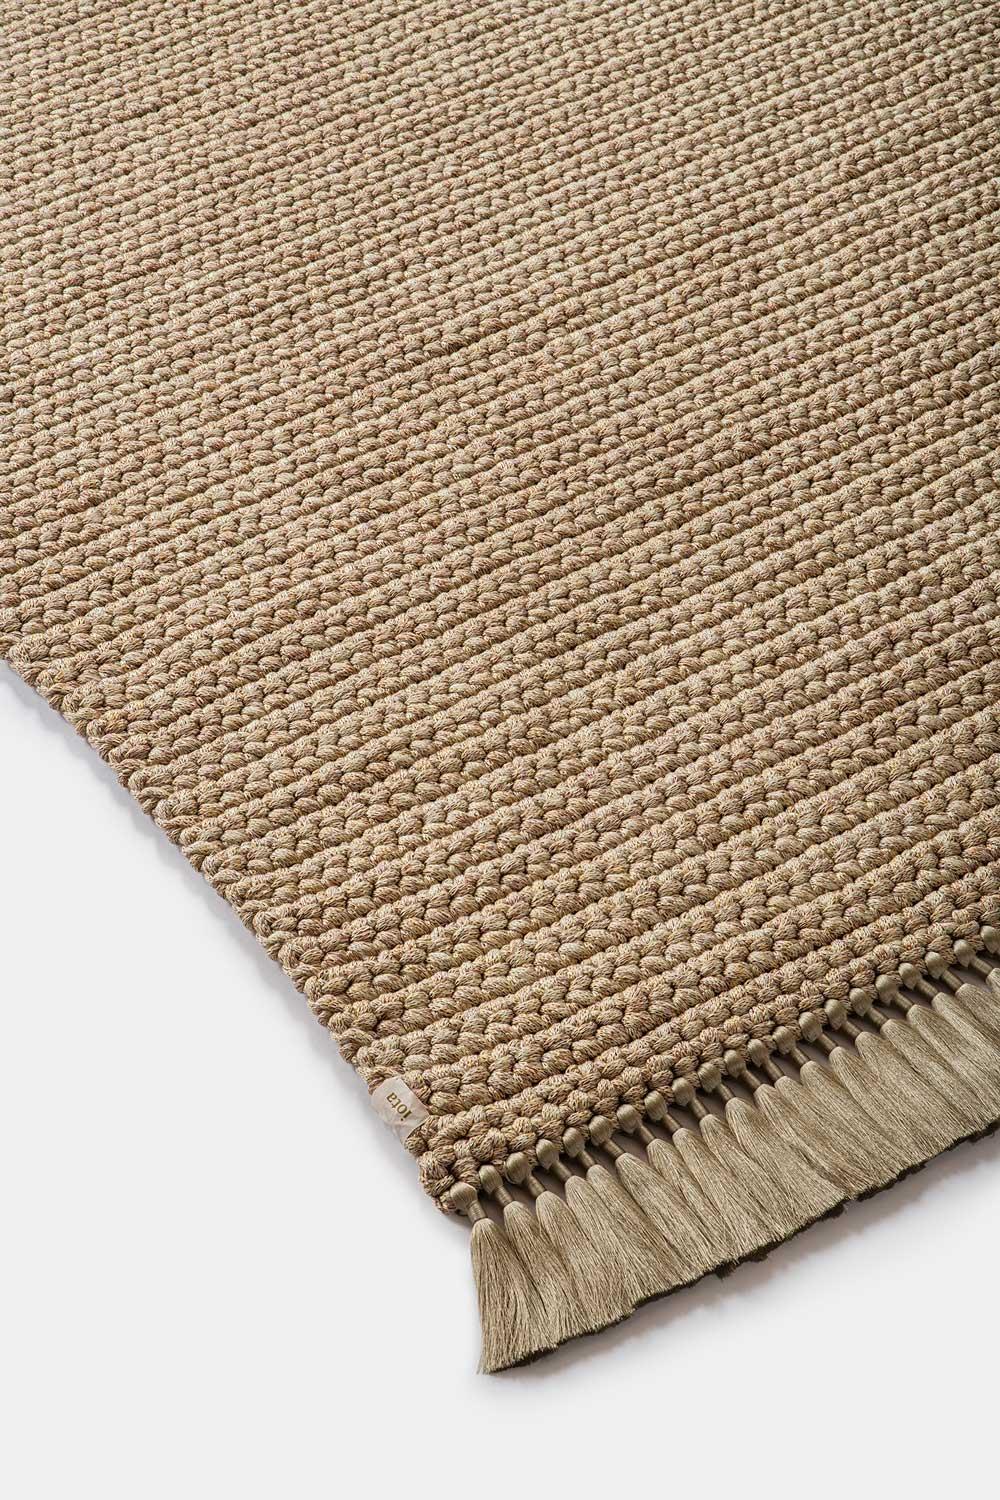 IOTA rugs are thick, soft, hand knit and luxurious, 3 times thicker than the standard rug. The Two Tone medium rugs create a subtle gradient that will light up any space, suitable for an intimate corner in the living space as well as for bedrooms,